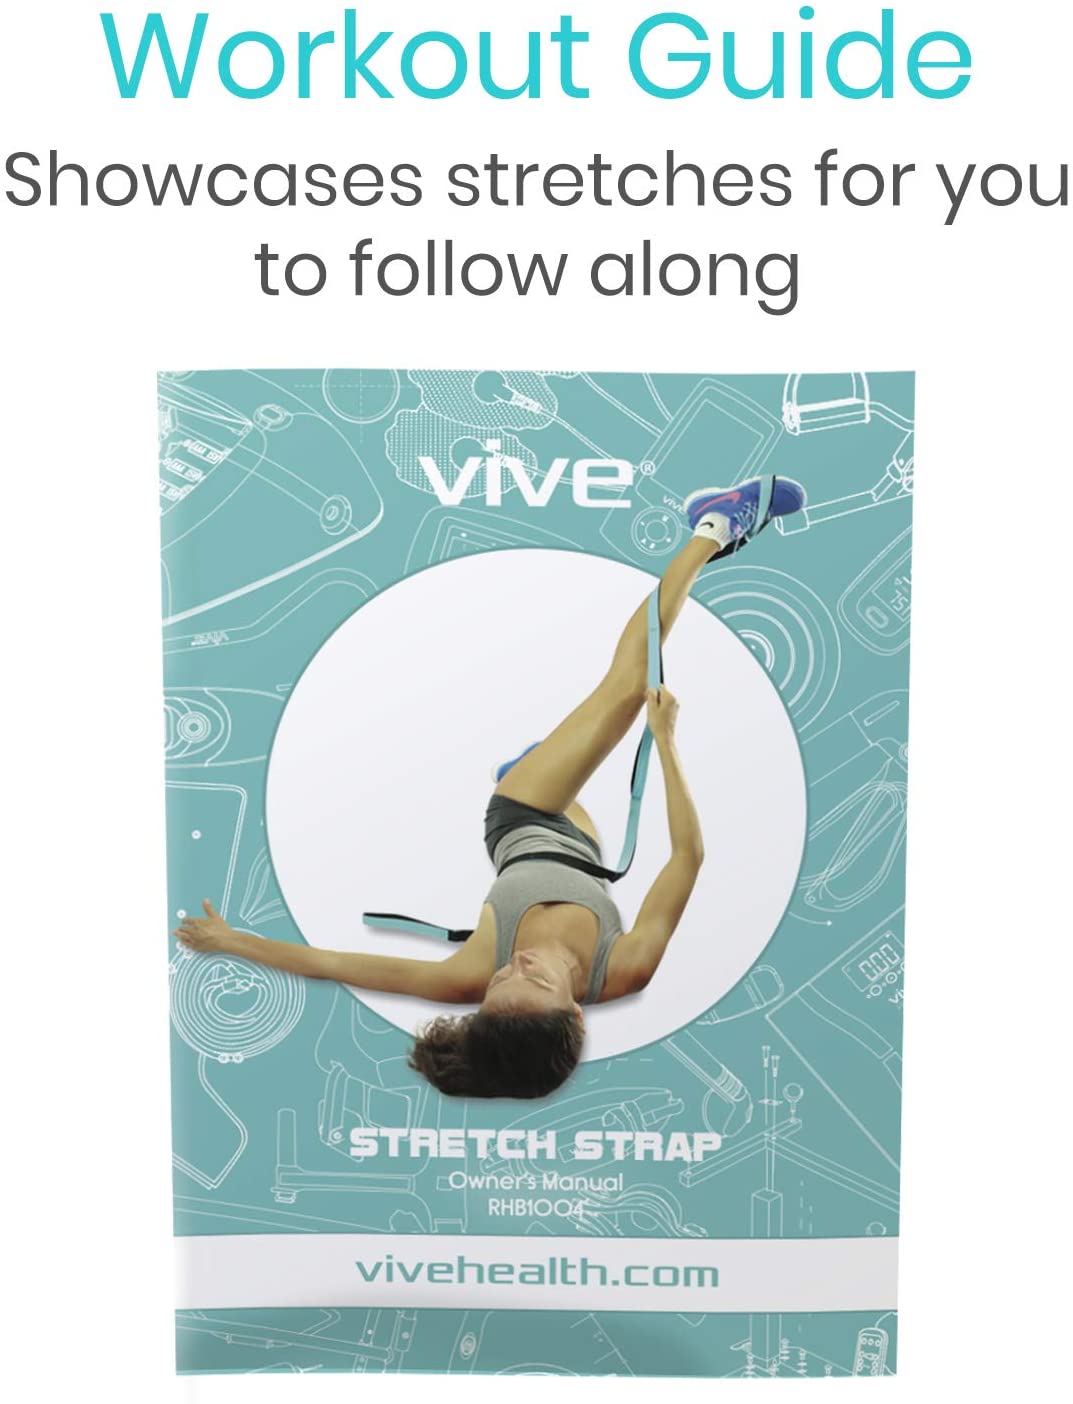 Vive Stretch Strap - Leg Stretch Band to Improve Flexibility - Stretching  Out Yoga Strap - Exercise and Physical Therapy Belt for Rehab, Pilates,  Dance and Gymnastics with Workout Guide Book (Gray) 